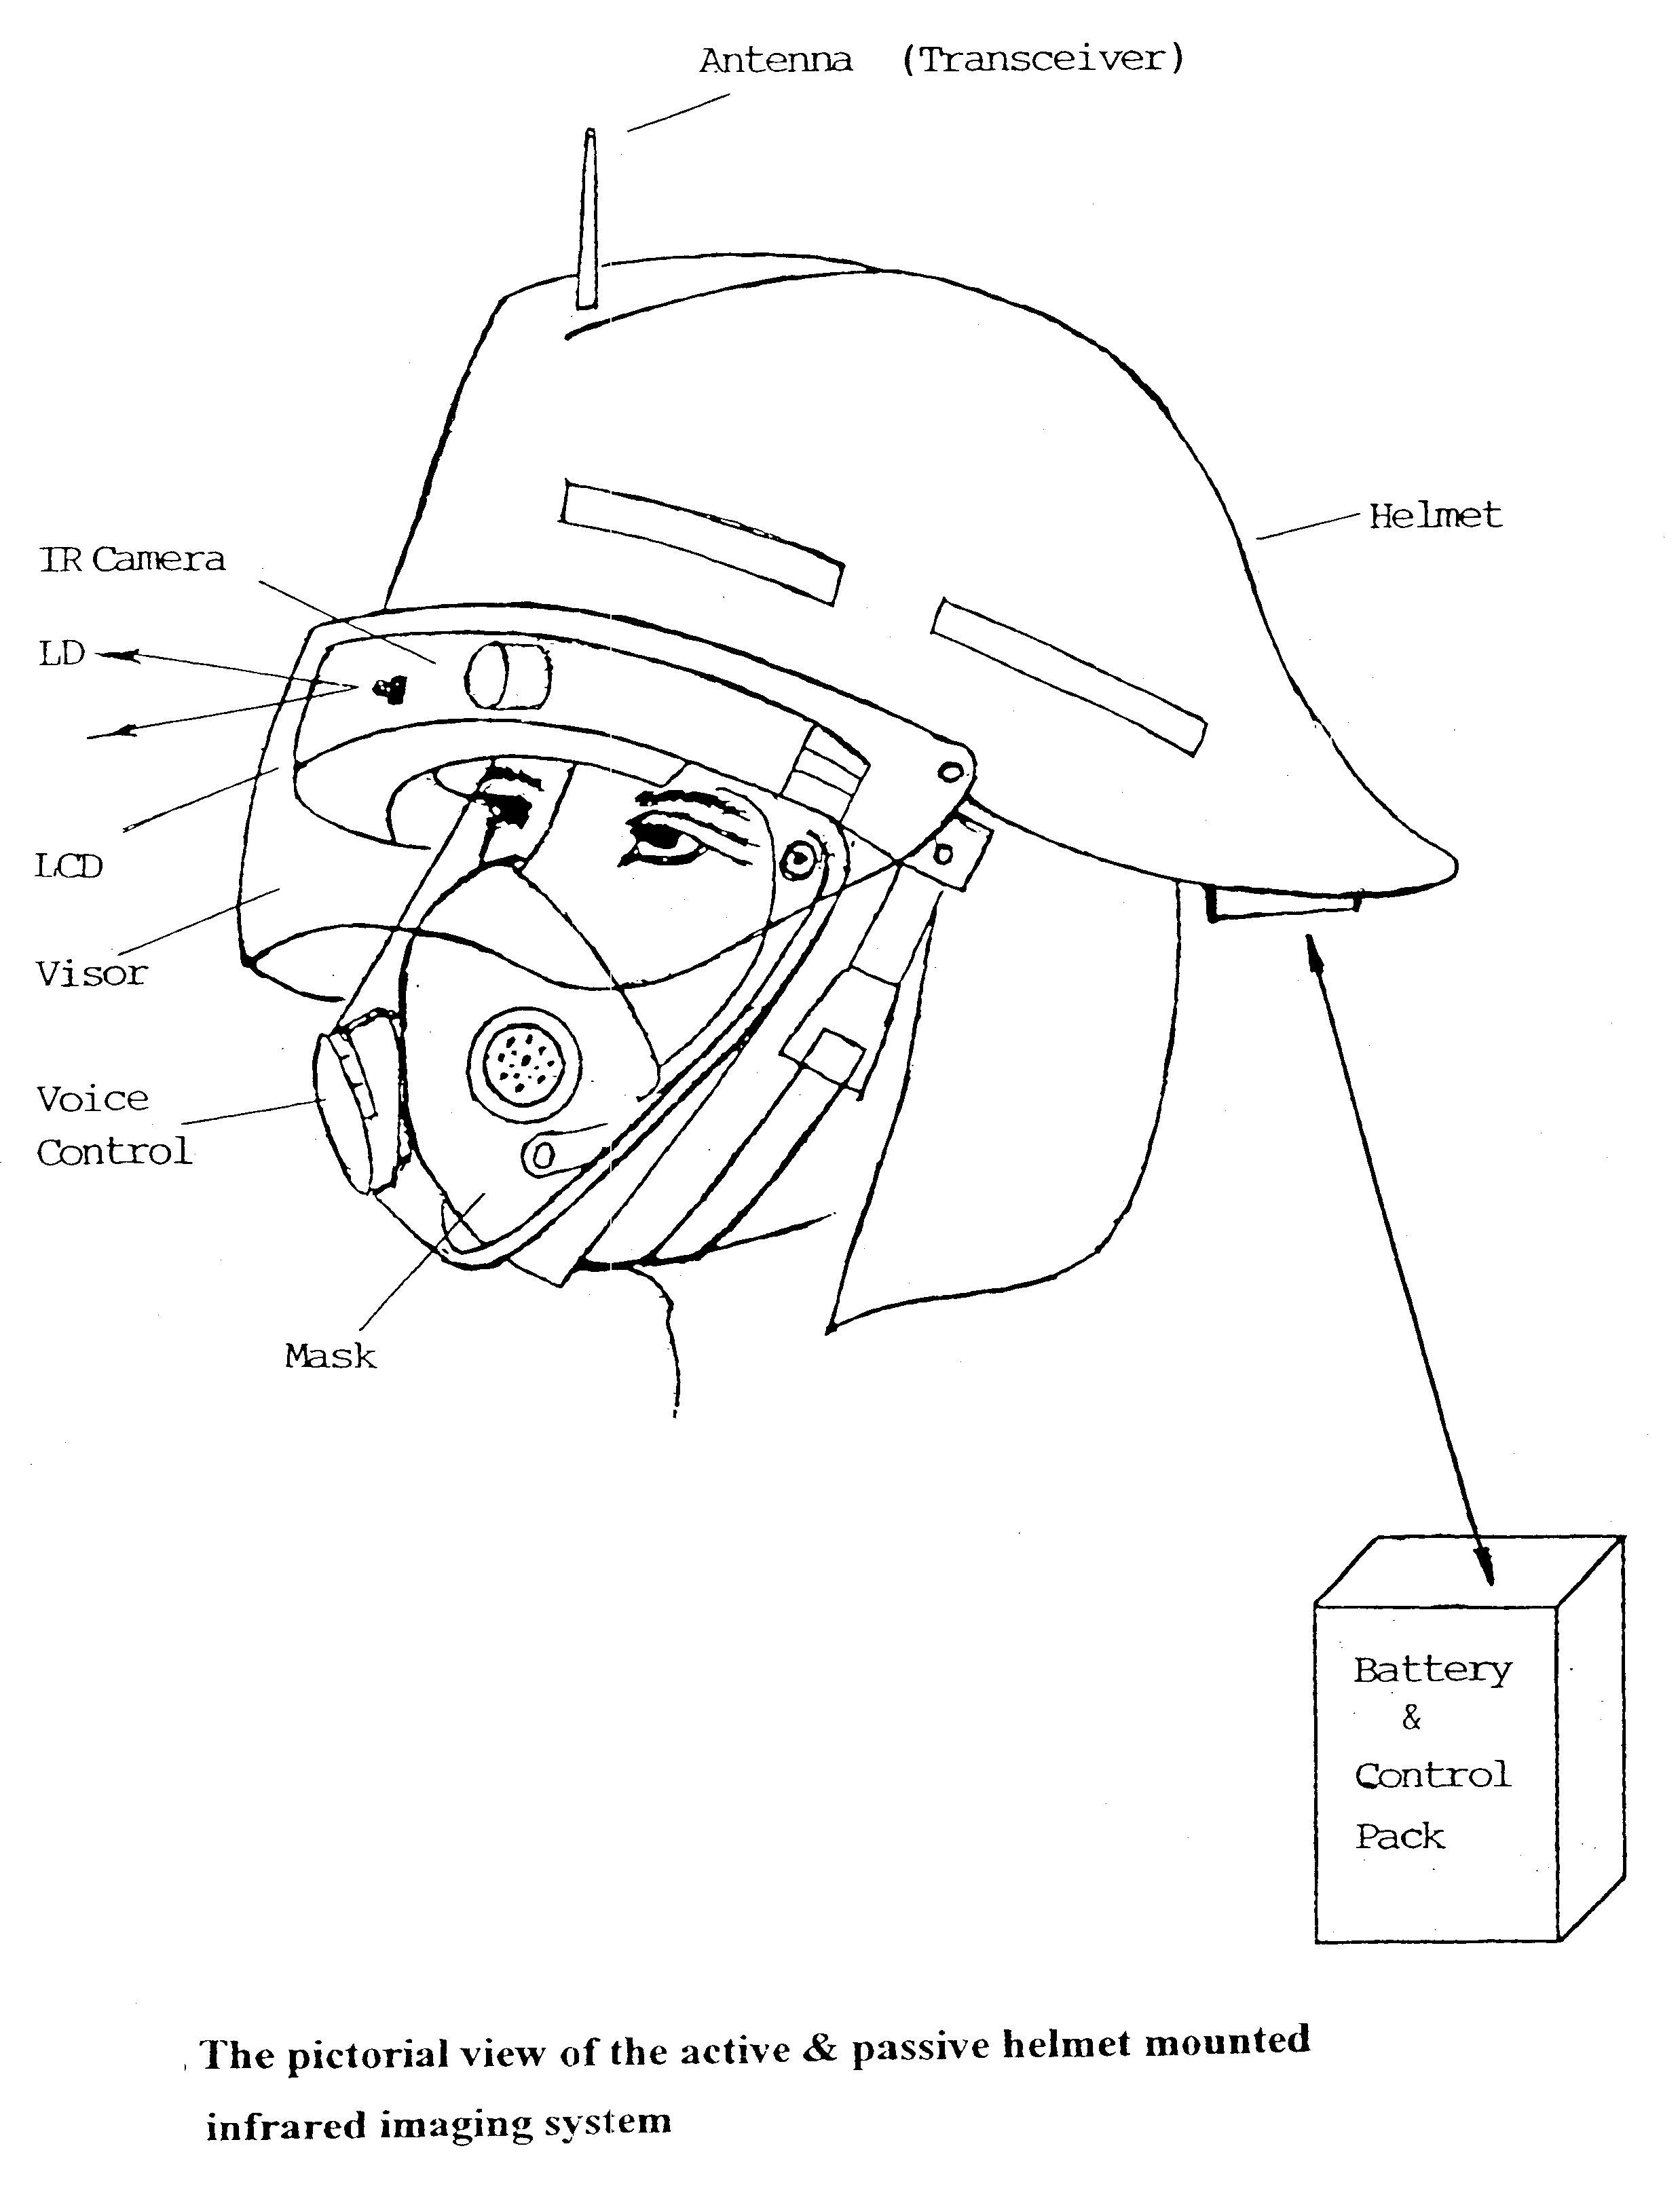 Head/helmet mounted passive and active infrared imaging system with/without parallax